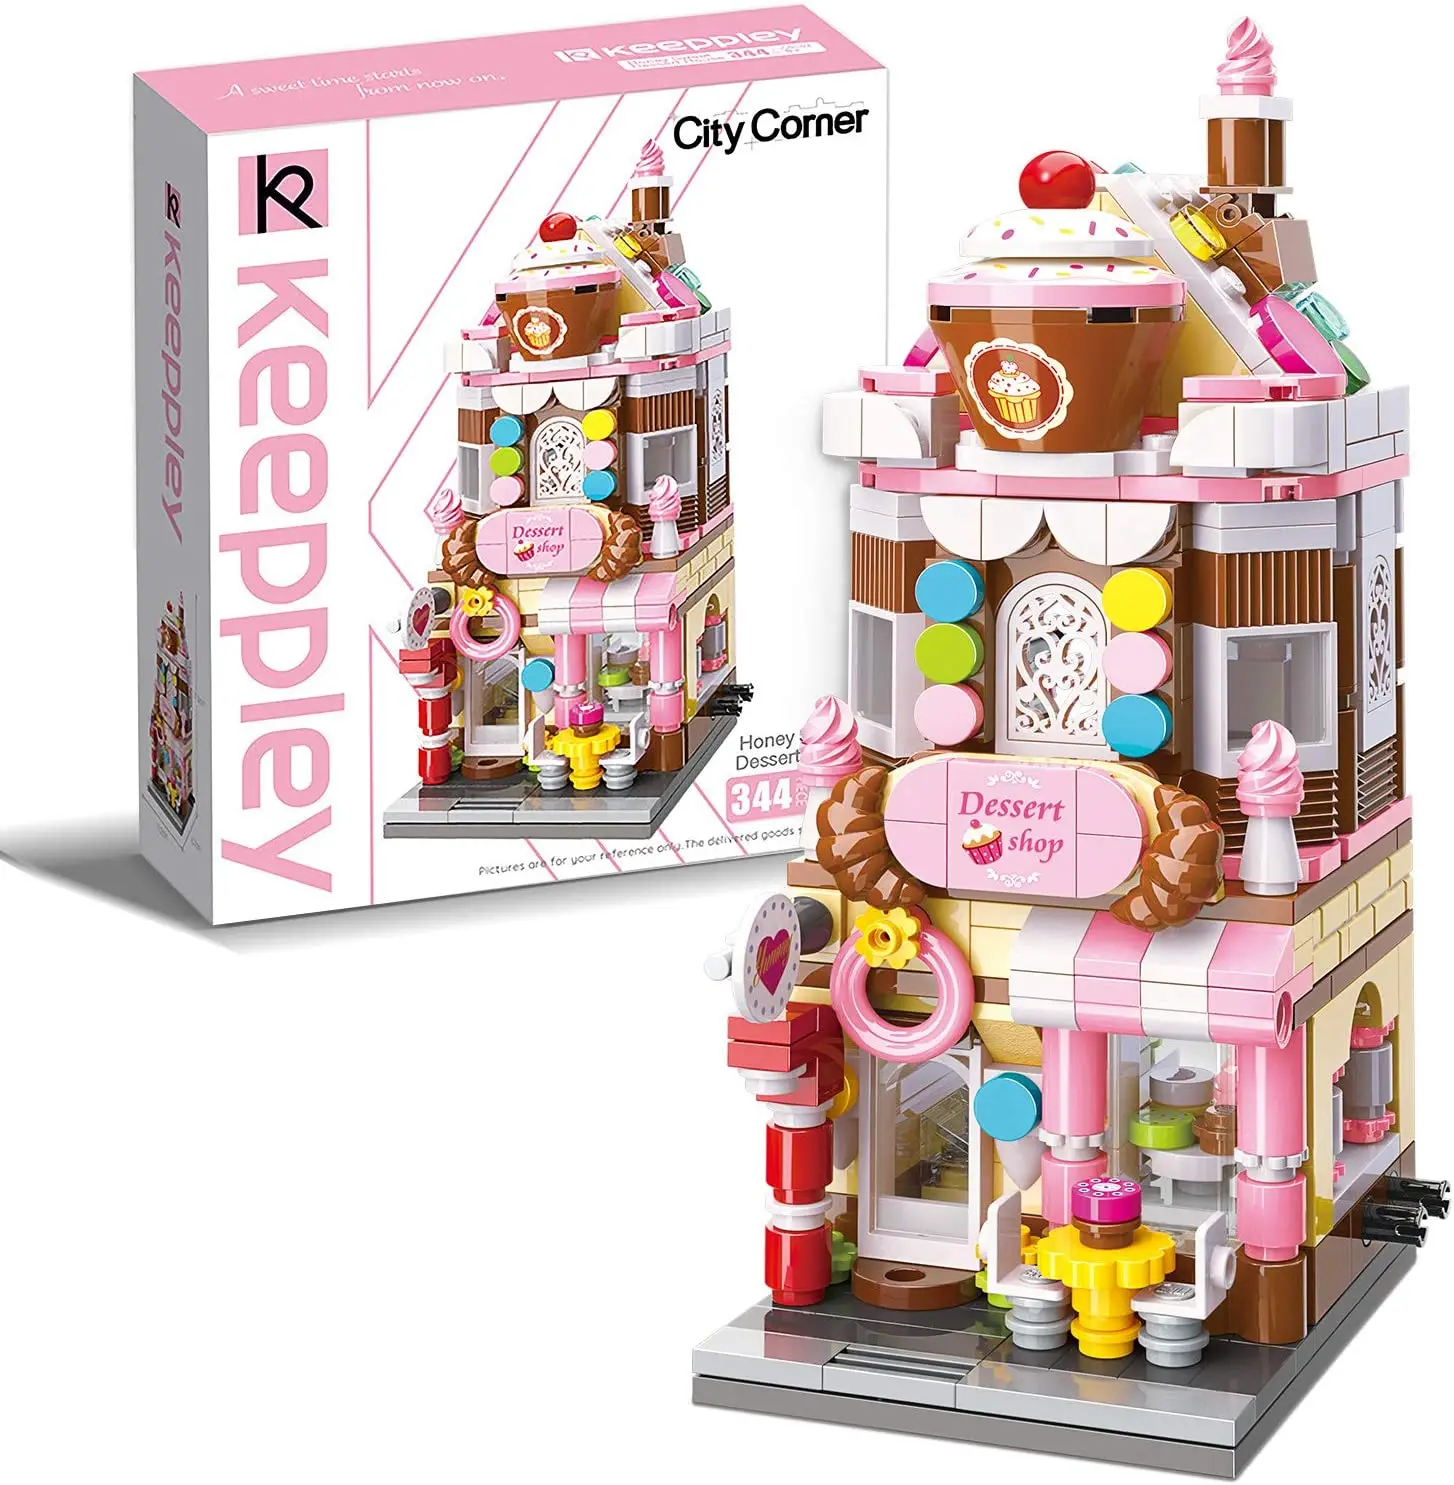 Kids Building Blocks Toy Dream Dessert House Coffee Shop Building Kit Street-View Construction Educational Toy for Girls Age 6+